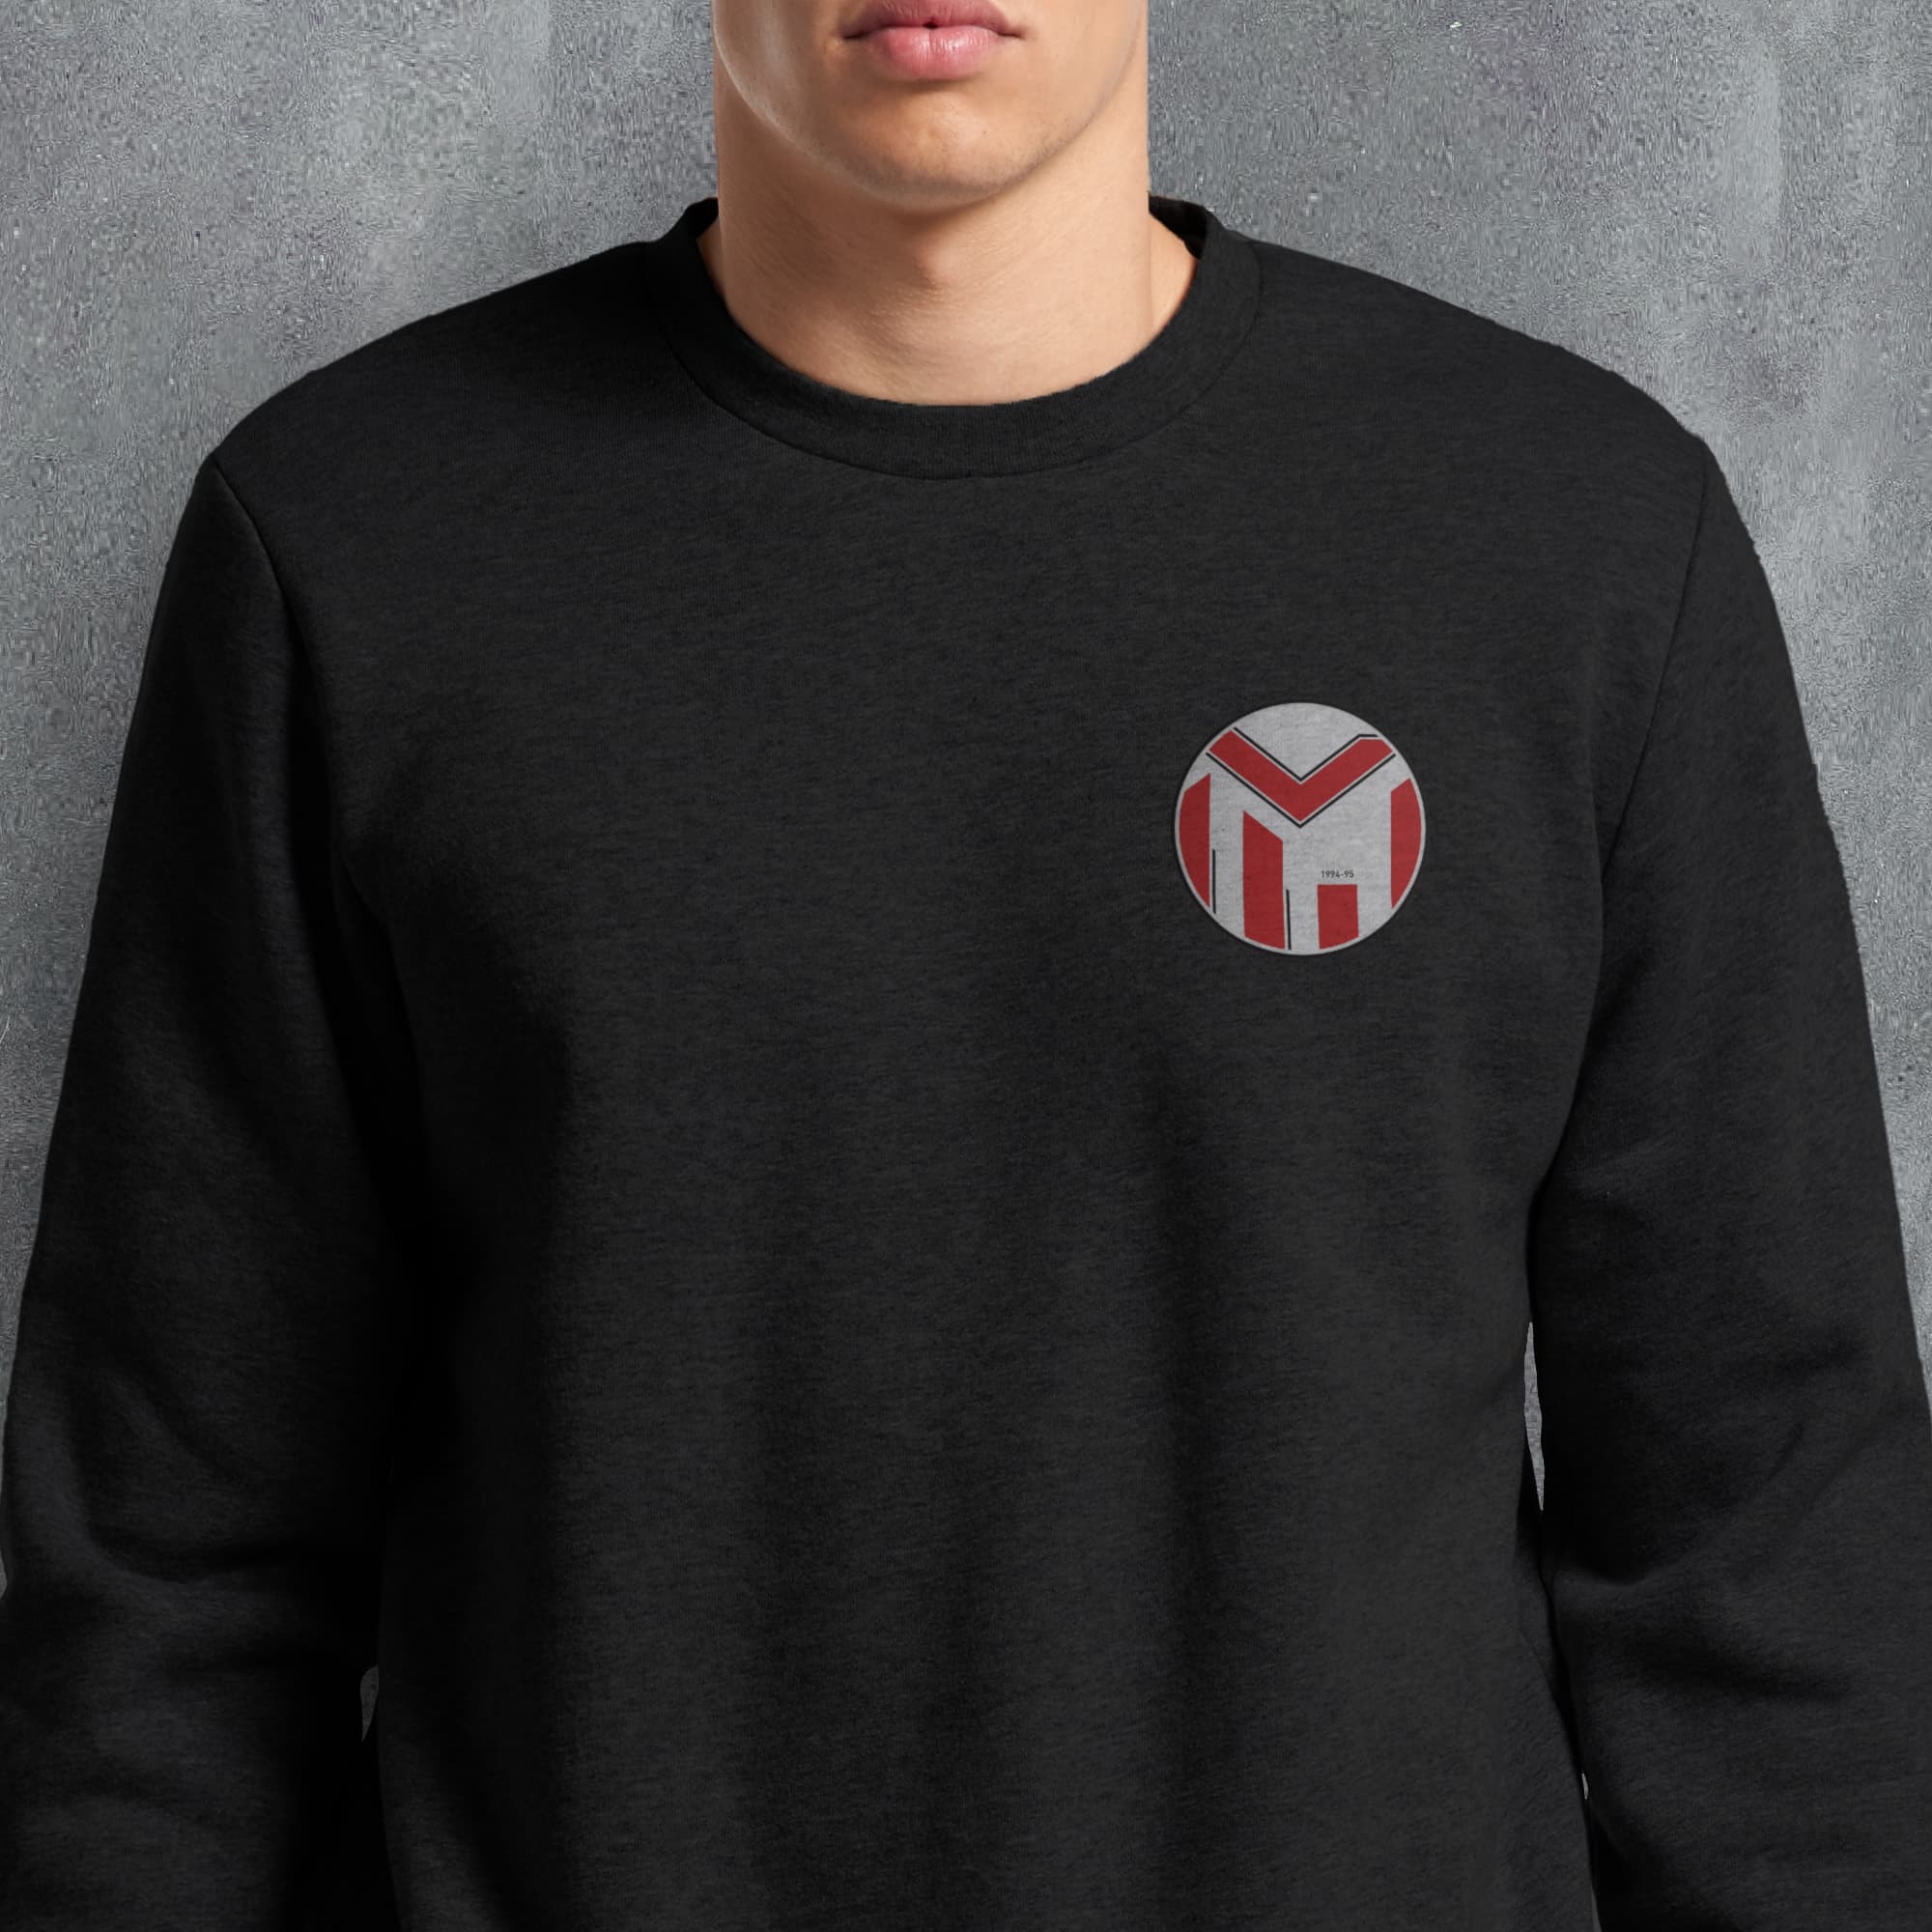 a man wearing a black sweatshirt with a red and white m on it